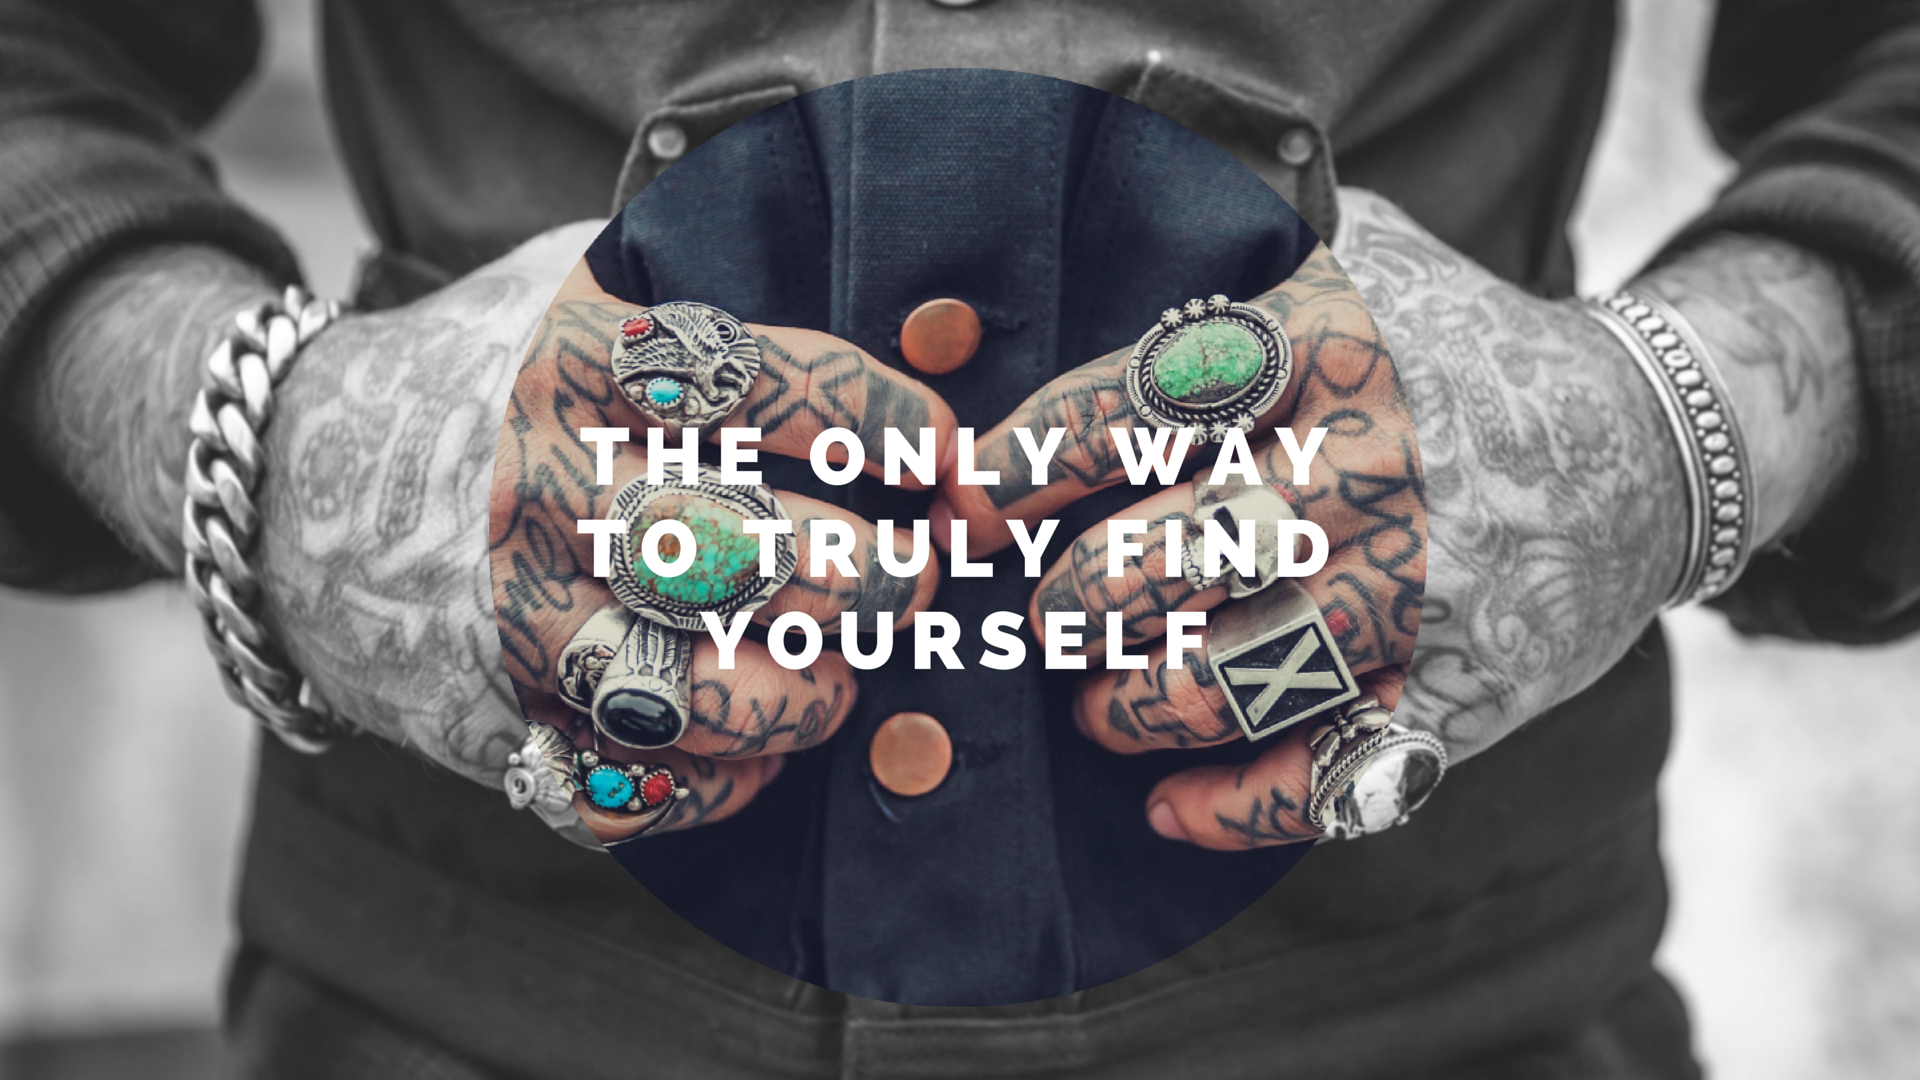 The Only Way to Truly Find Yourself